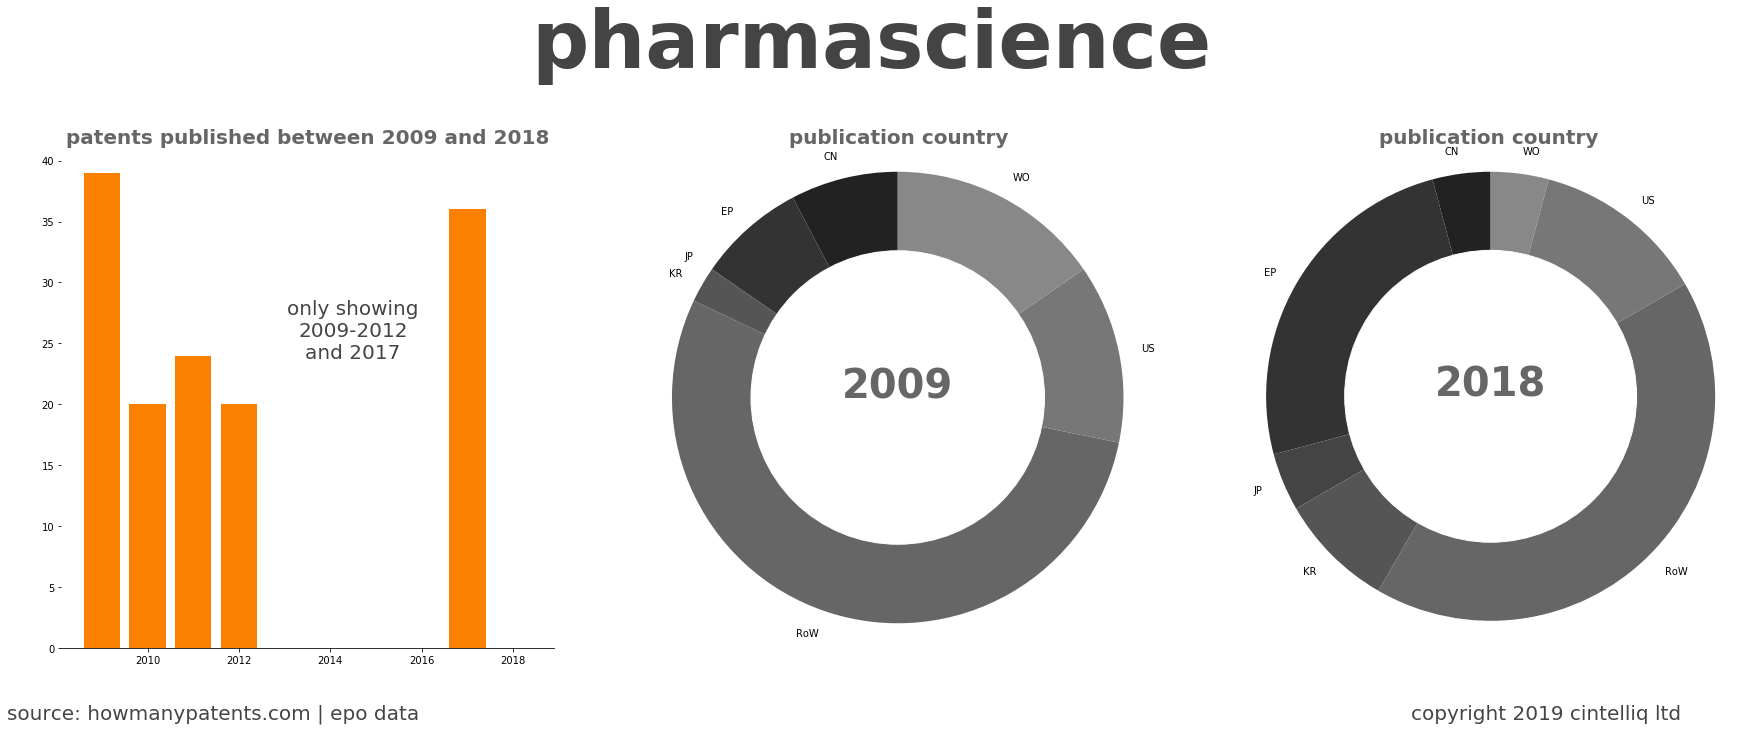 summary of patents for Pharmascience